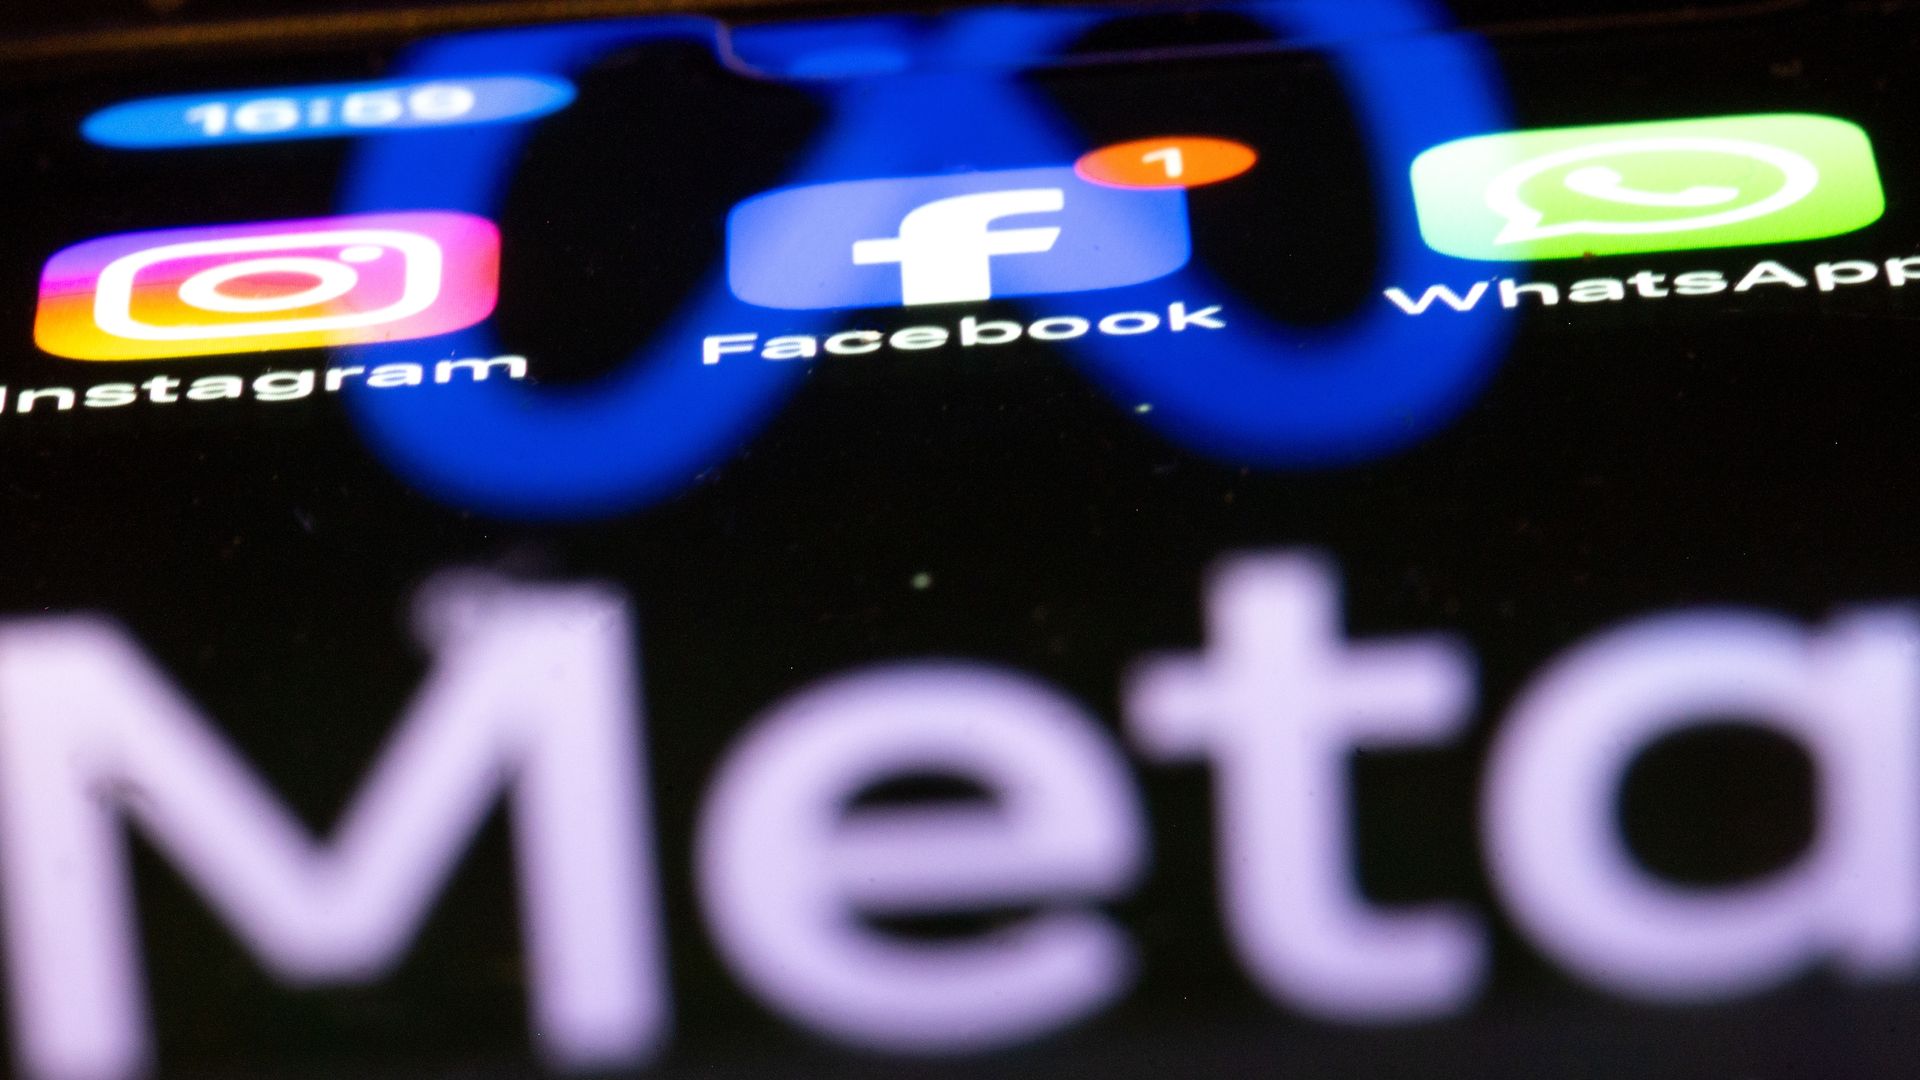 Big Tech is raising concerns about user privacy with new terms of service; Meta is rolling out a plan to use private data for its AI products.